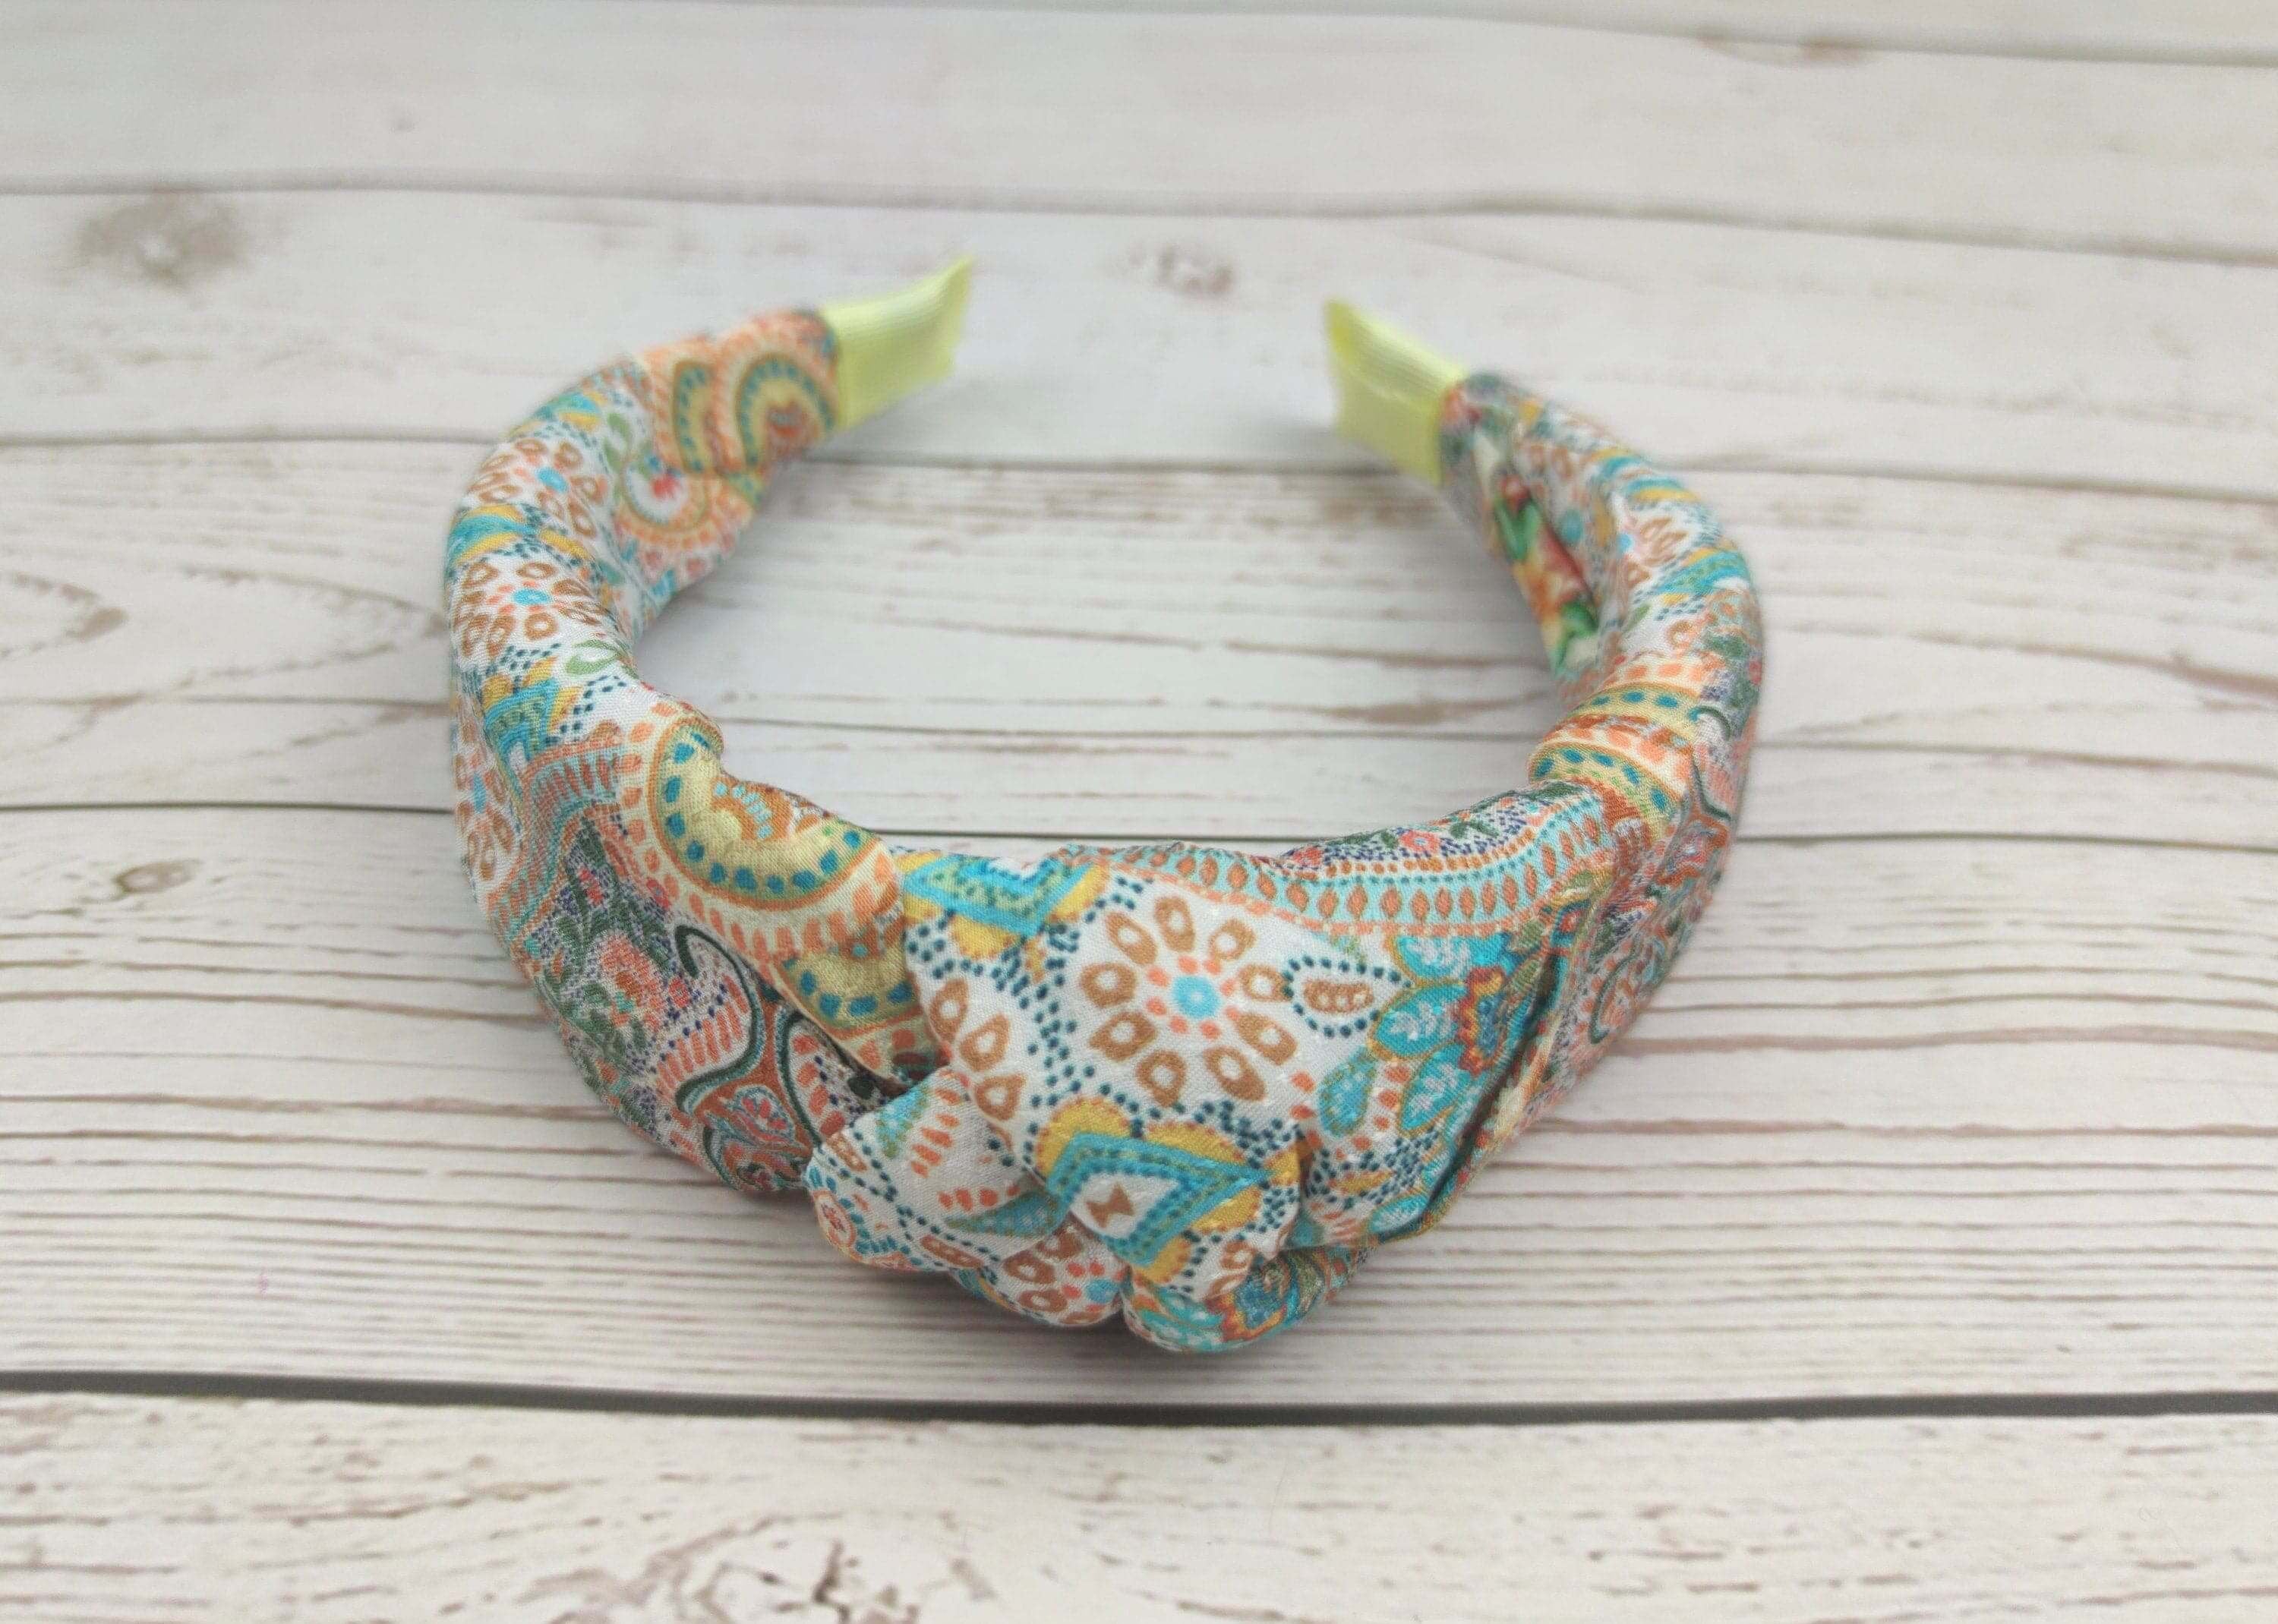 A fashionable headband with a knotted design that adds a pop of color to any outfit.